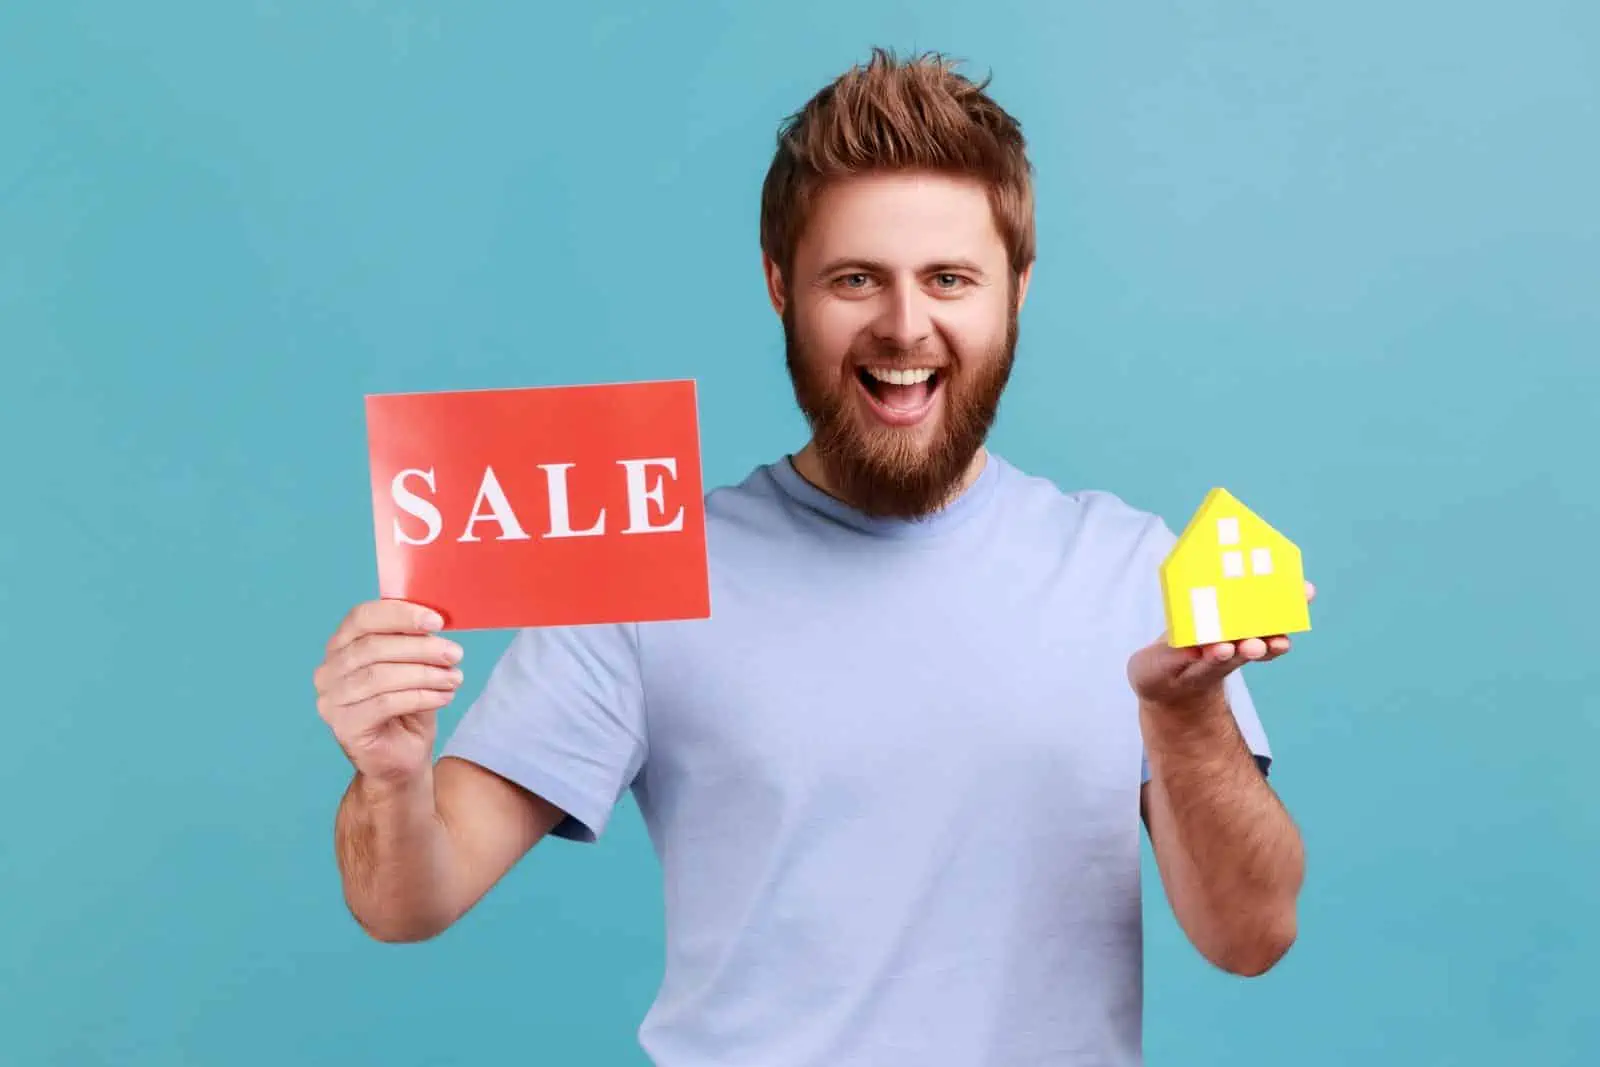 How To Sell My House Without A Realtor